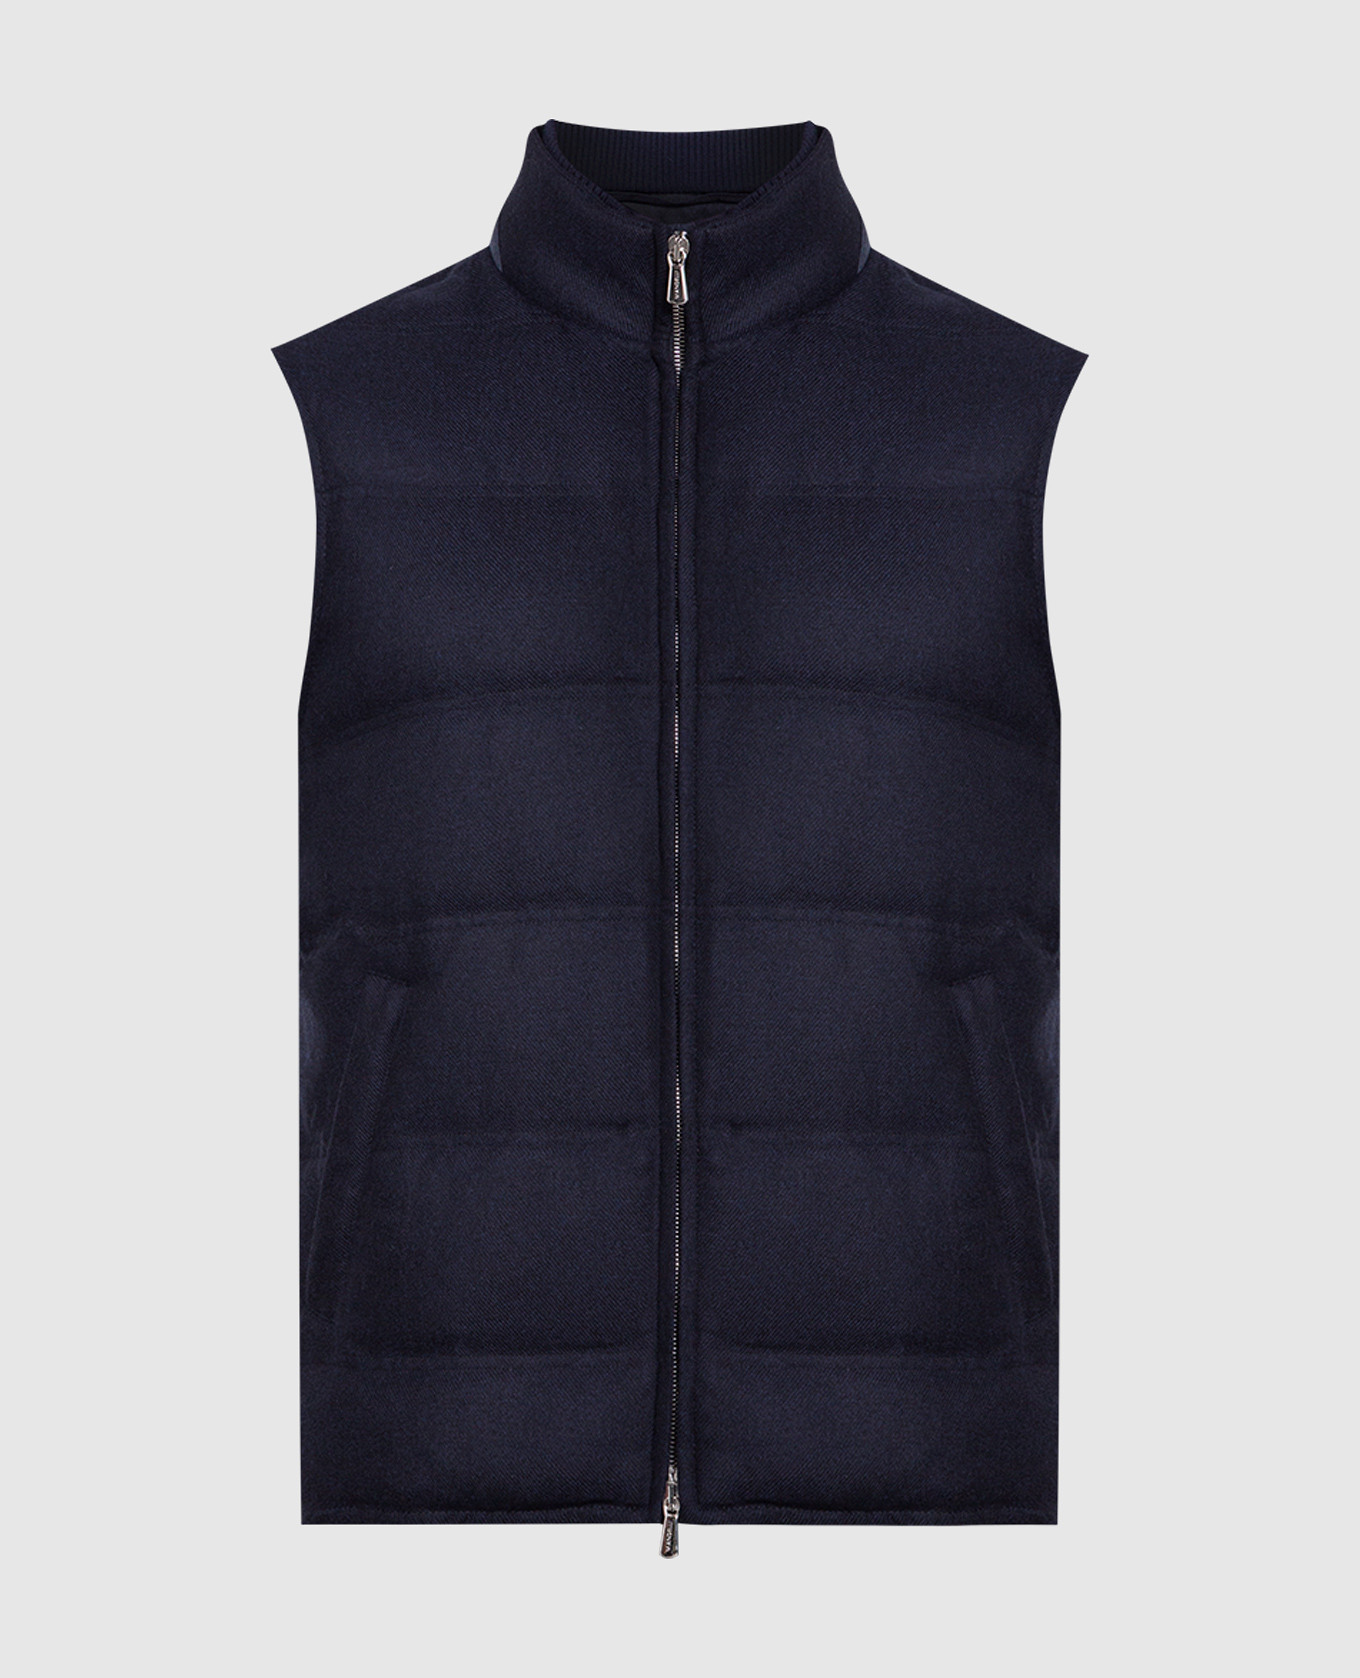 Blue down vest made of wool and cashmere